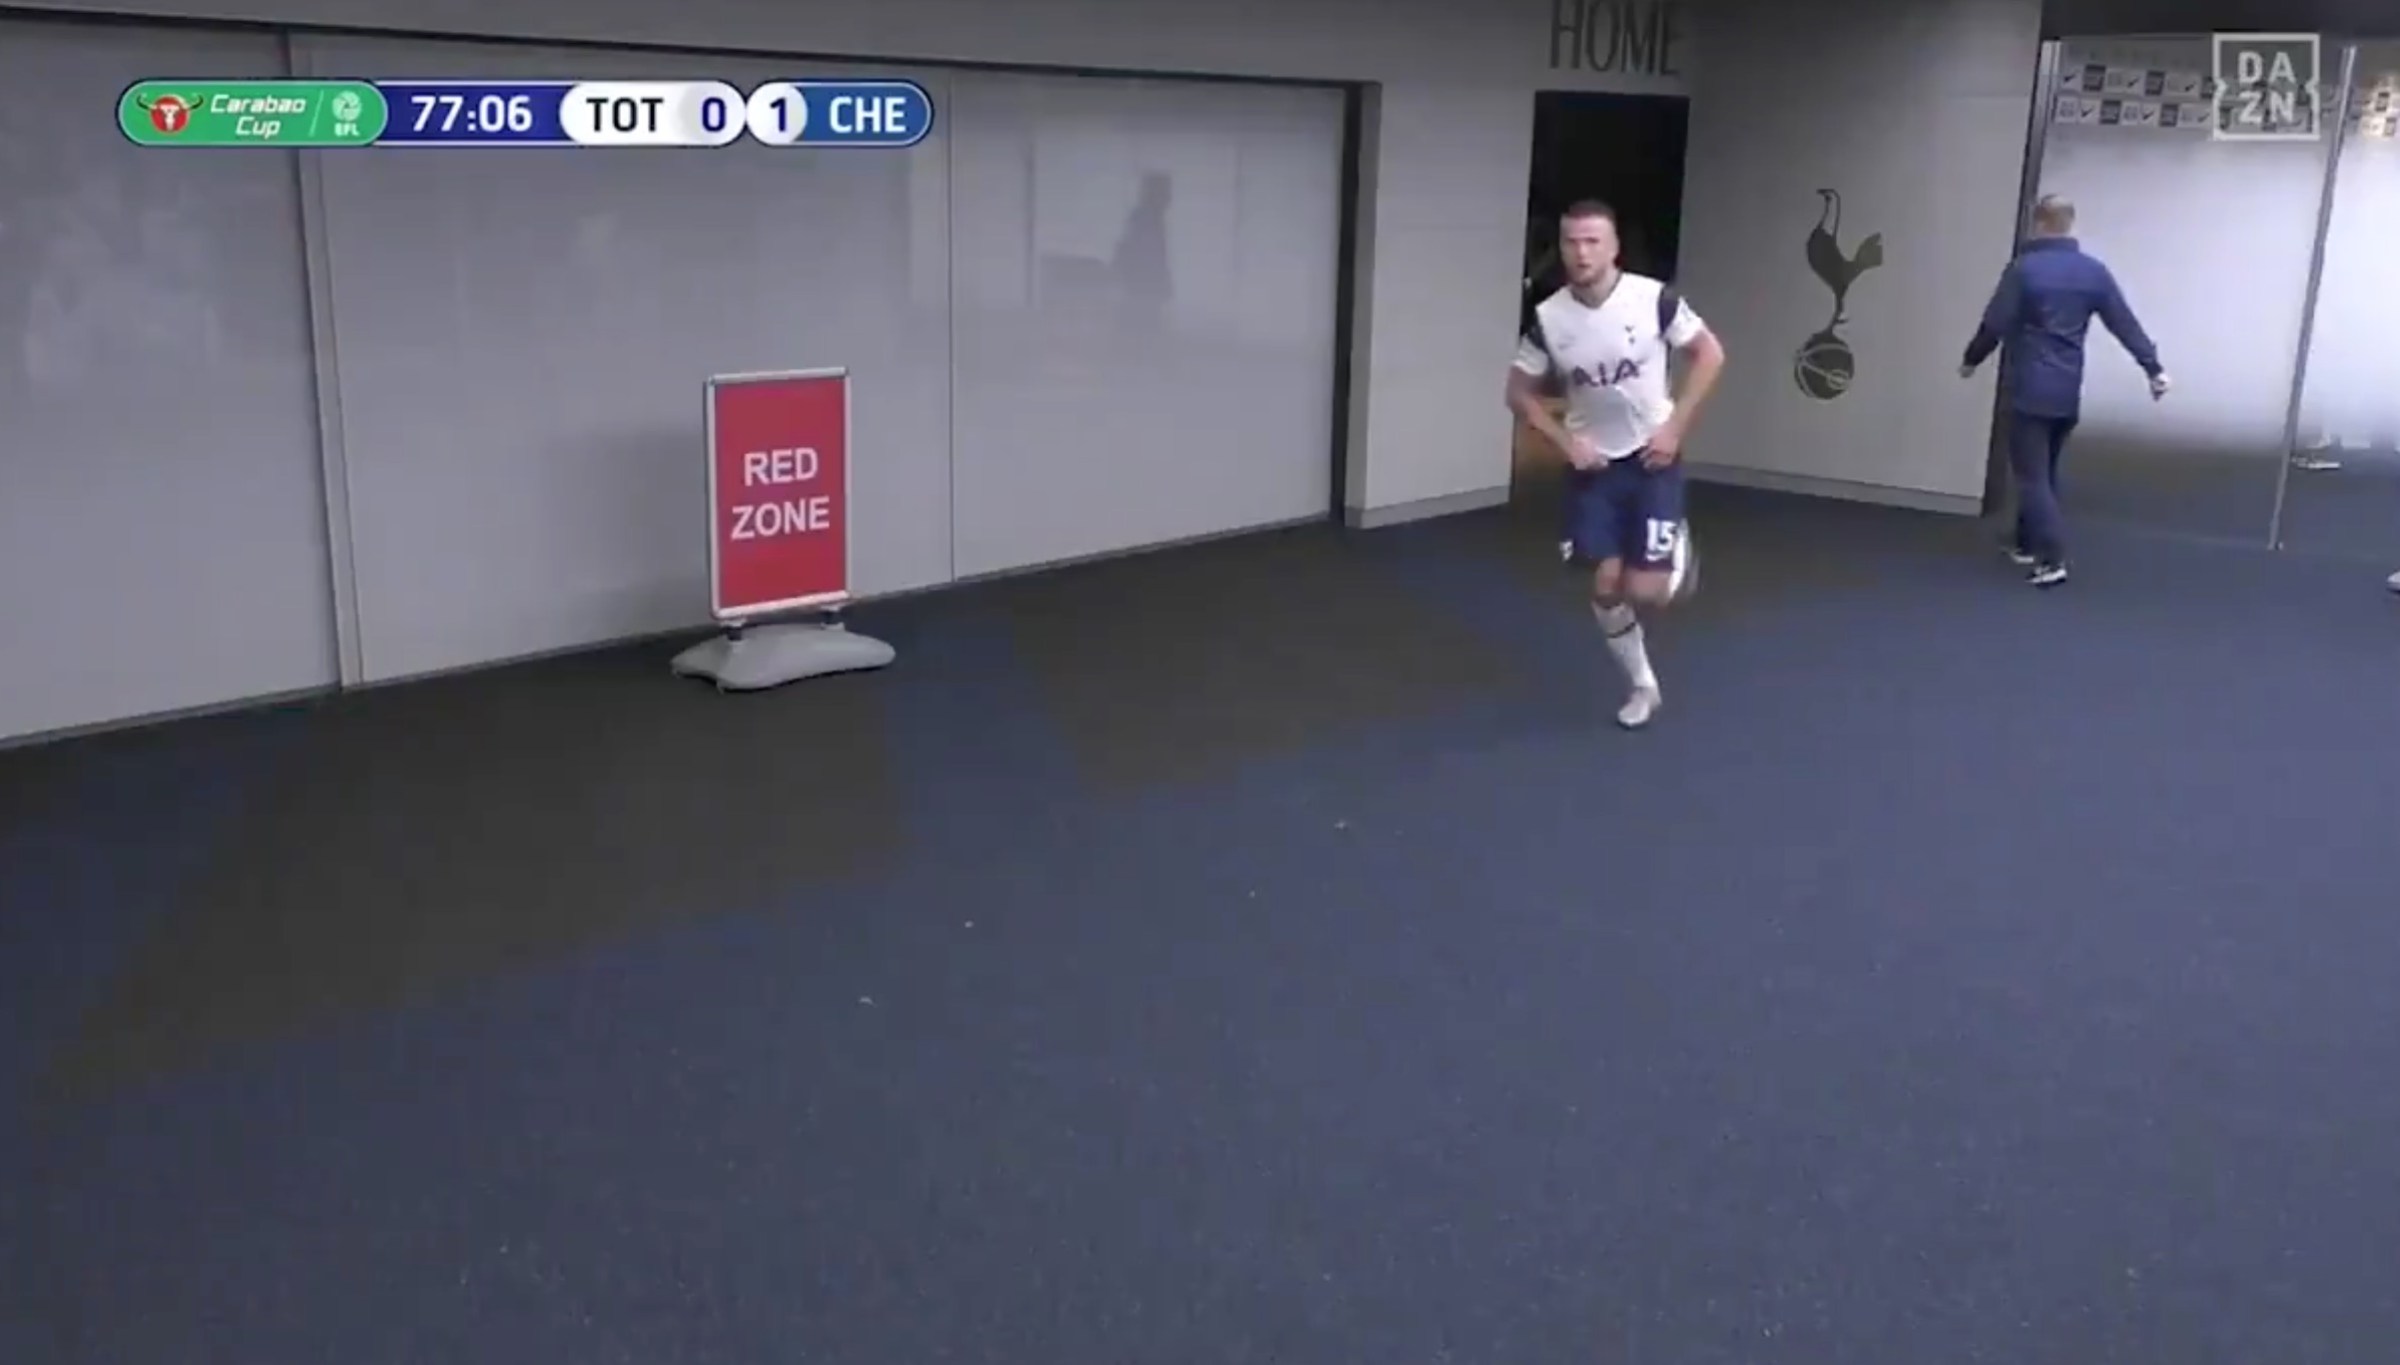 Dier returns after crapping and/or peeing.